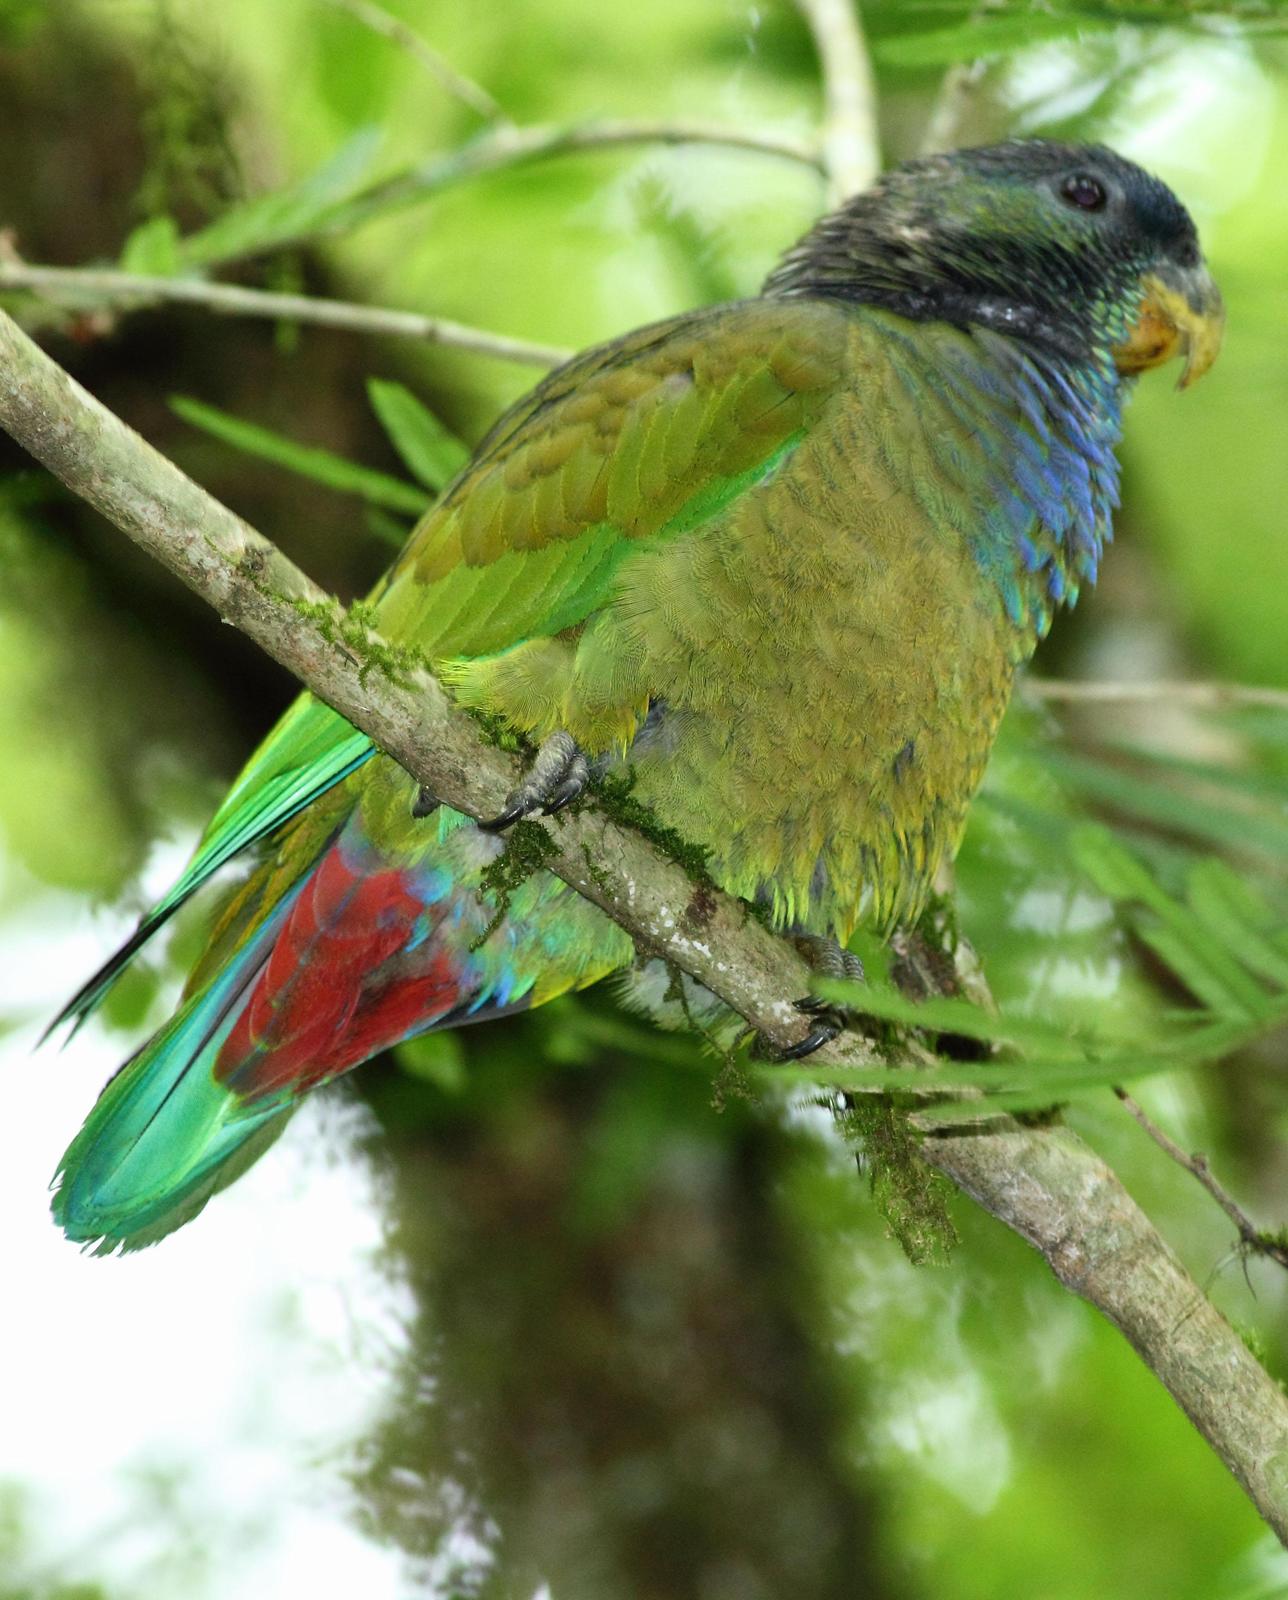 Scaly-headed Parrot Photo by Lee Harding